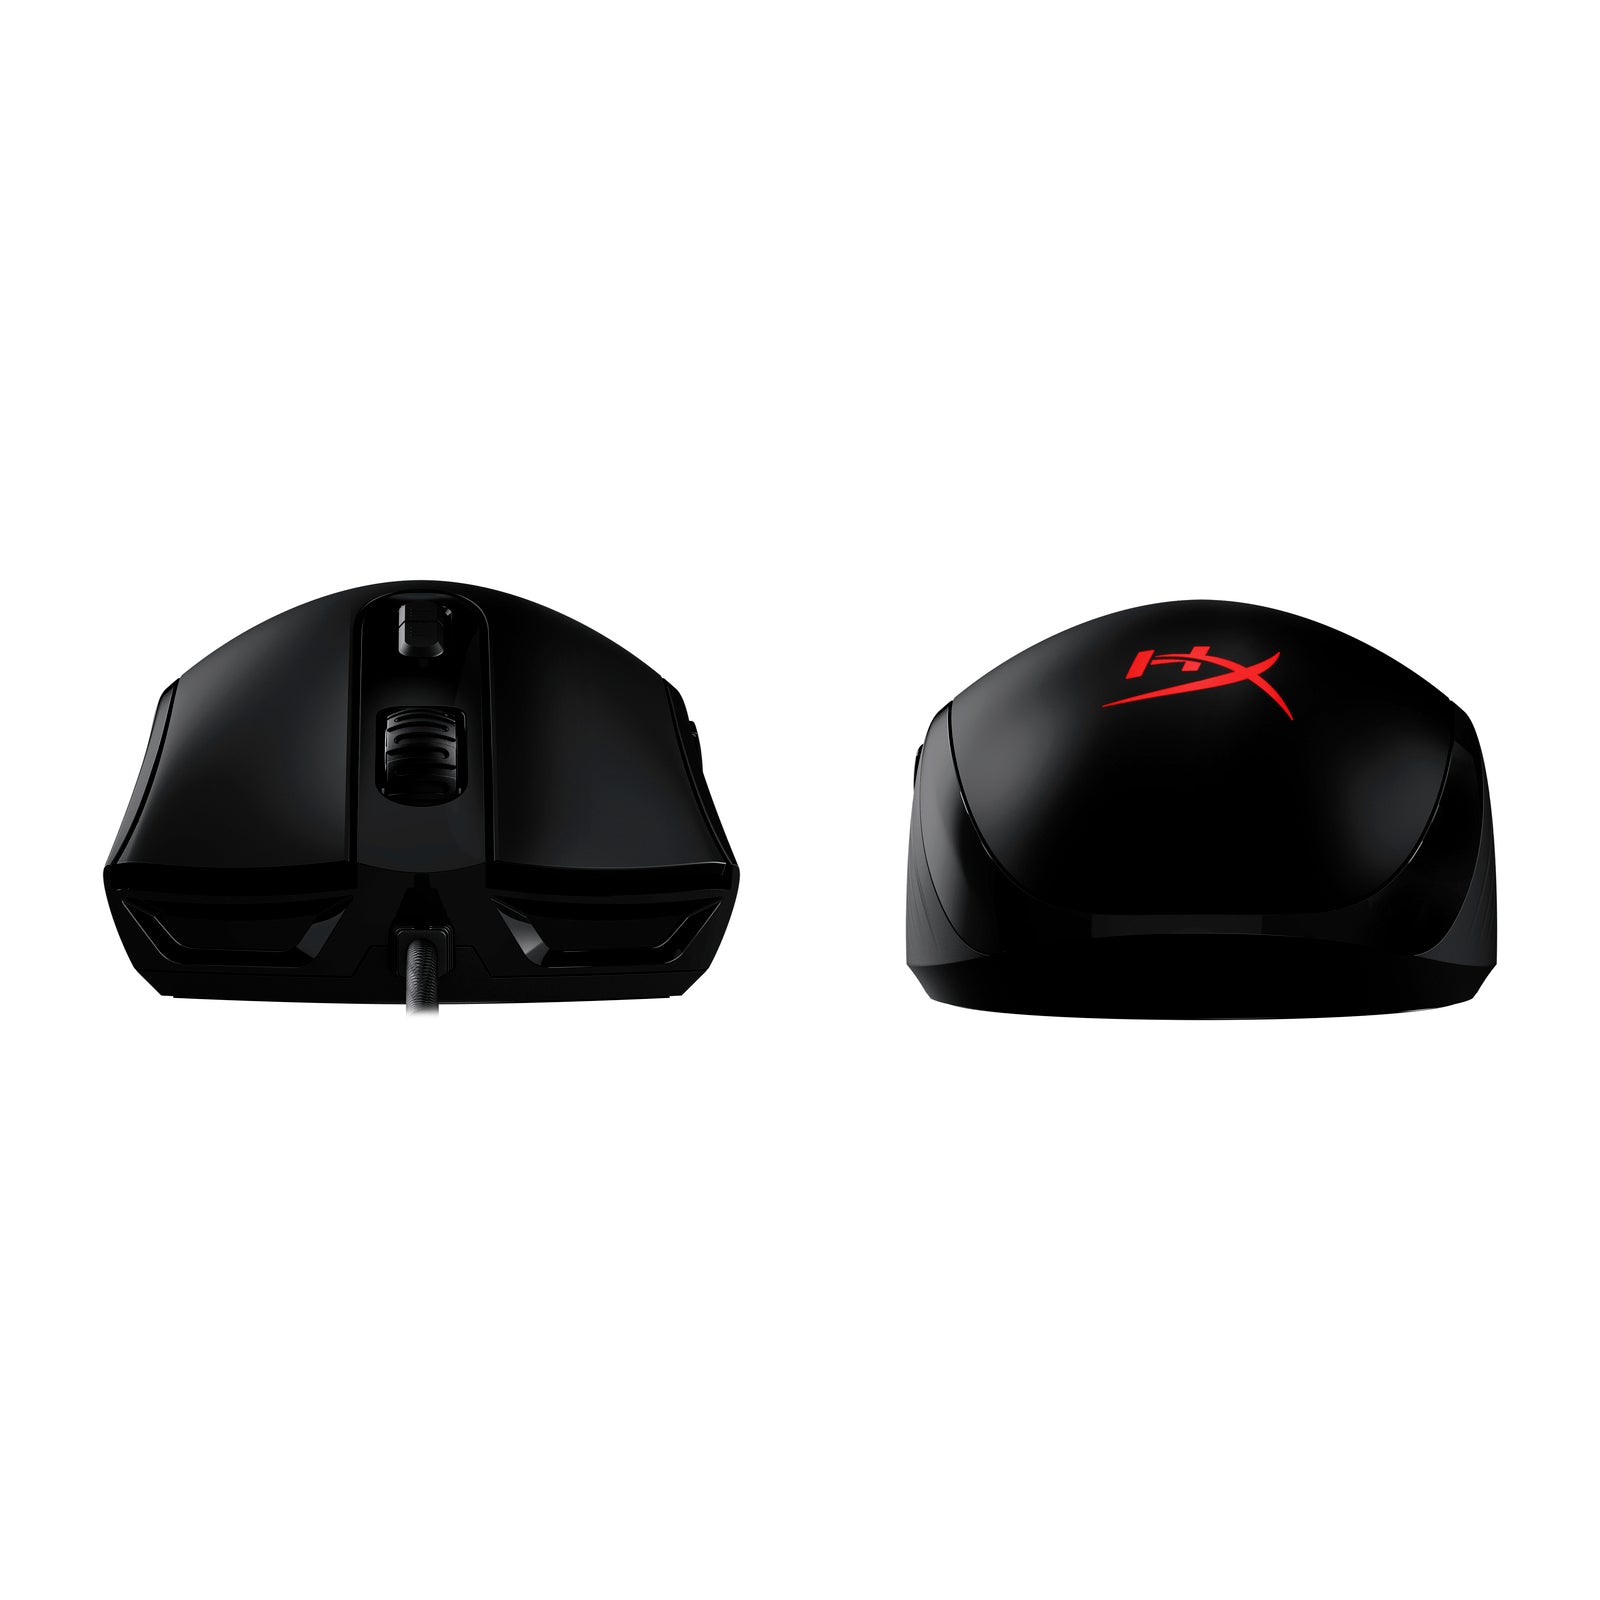 Pulsefire Core - Mouse RGB HyperX Gaming 